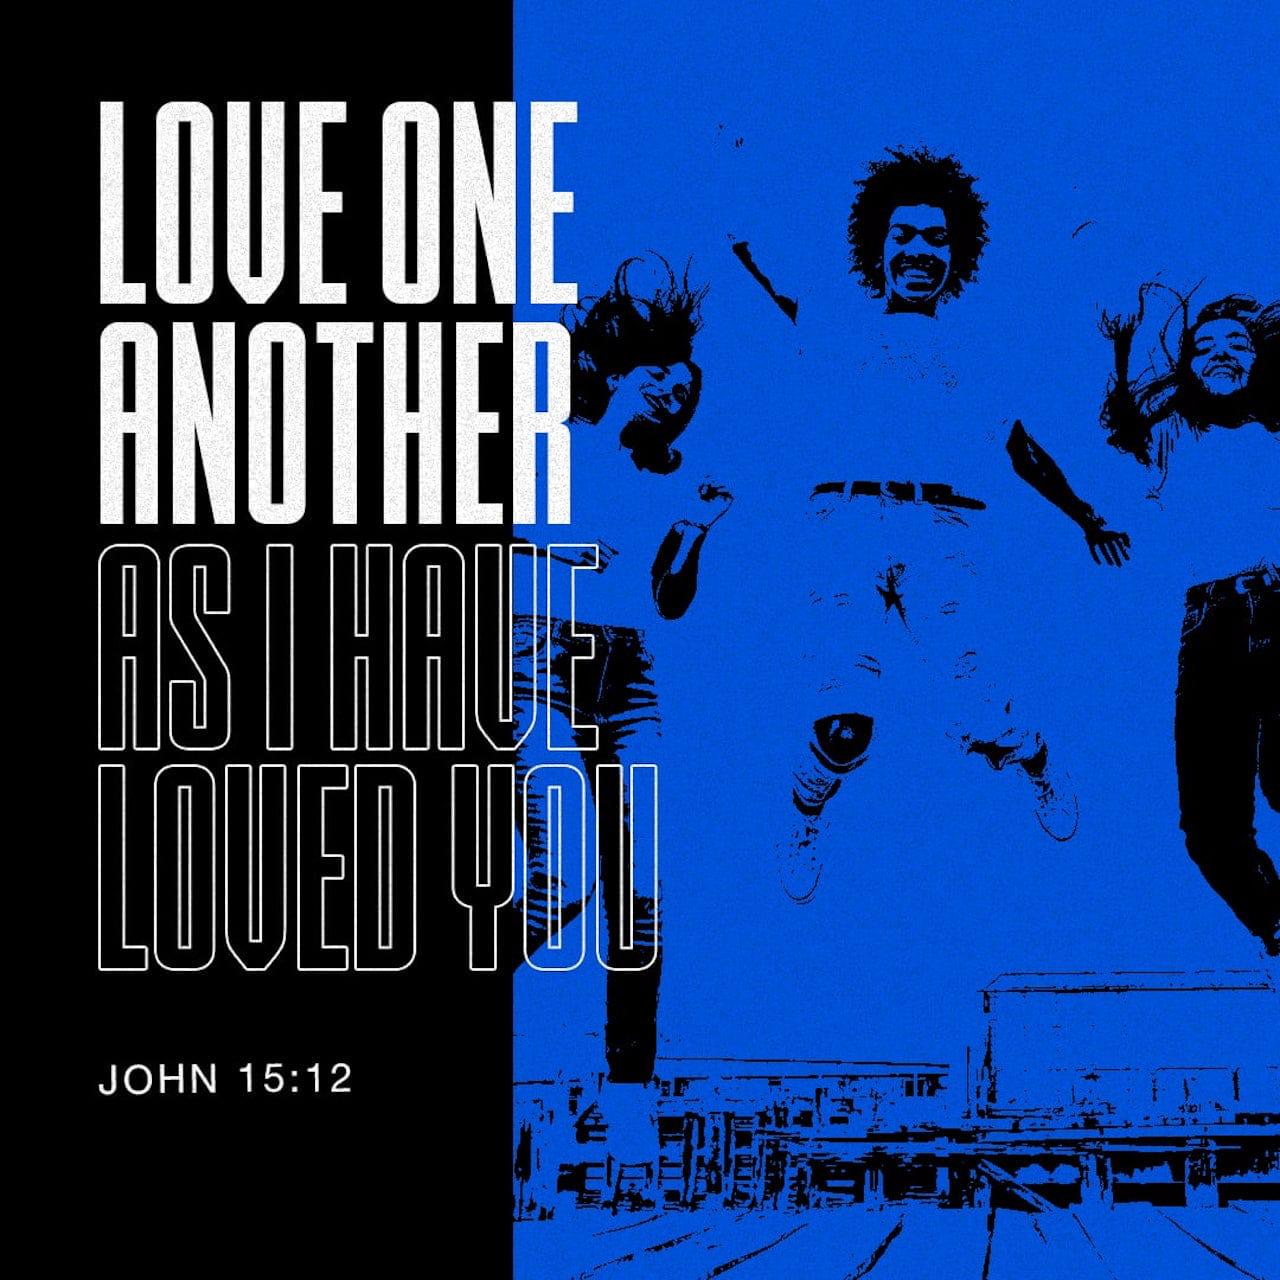 VOTD February 11 - ““This is My commandment, that you love one another, just as I have loved you.” ‭‭John‬ ‭15:12‬ ‭NASB‬‬